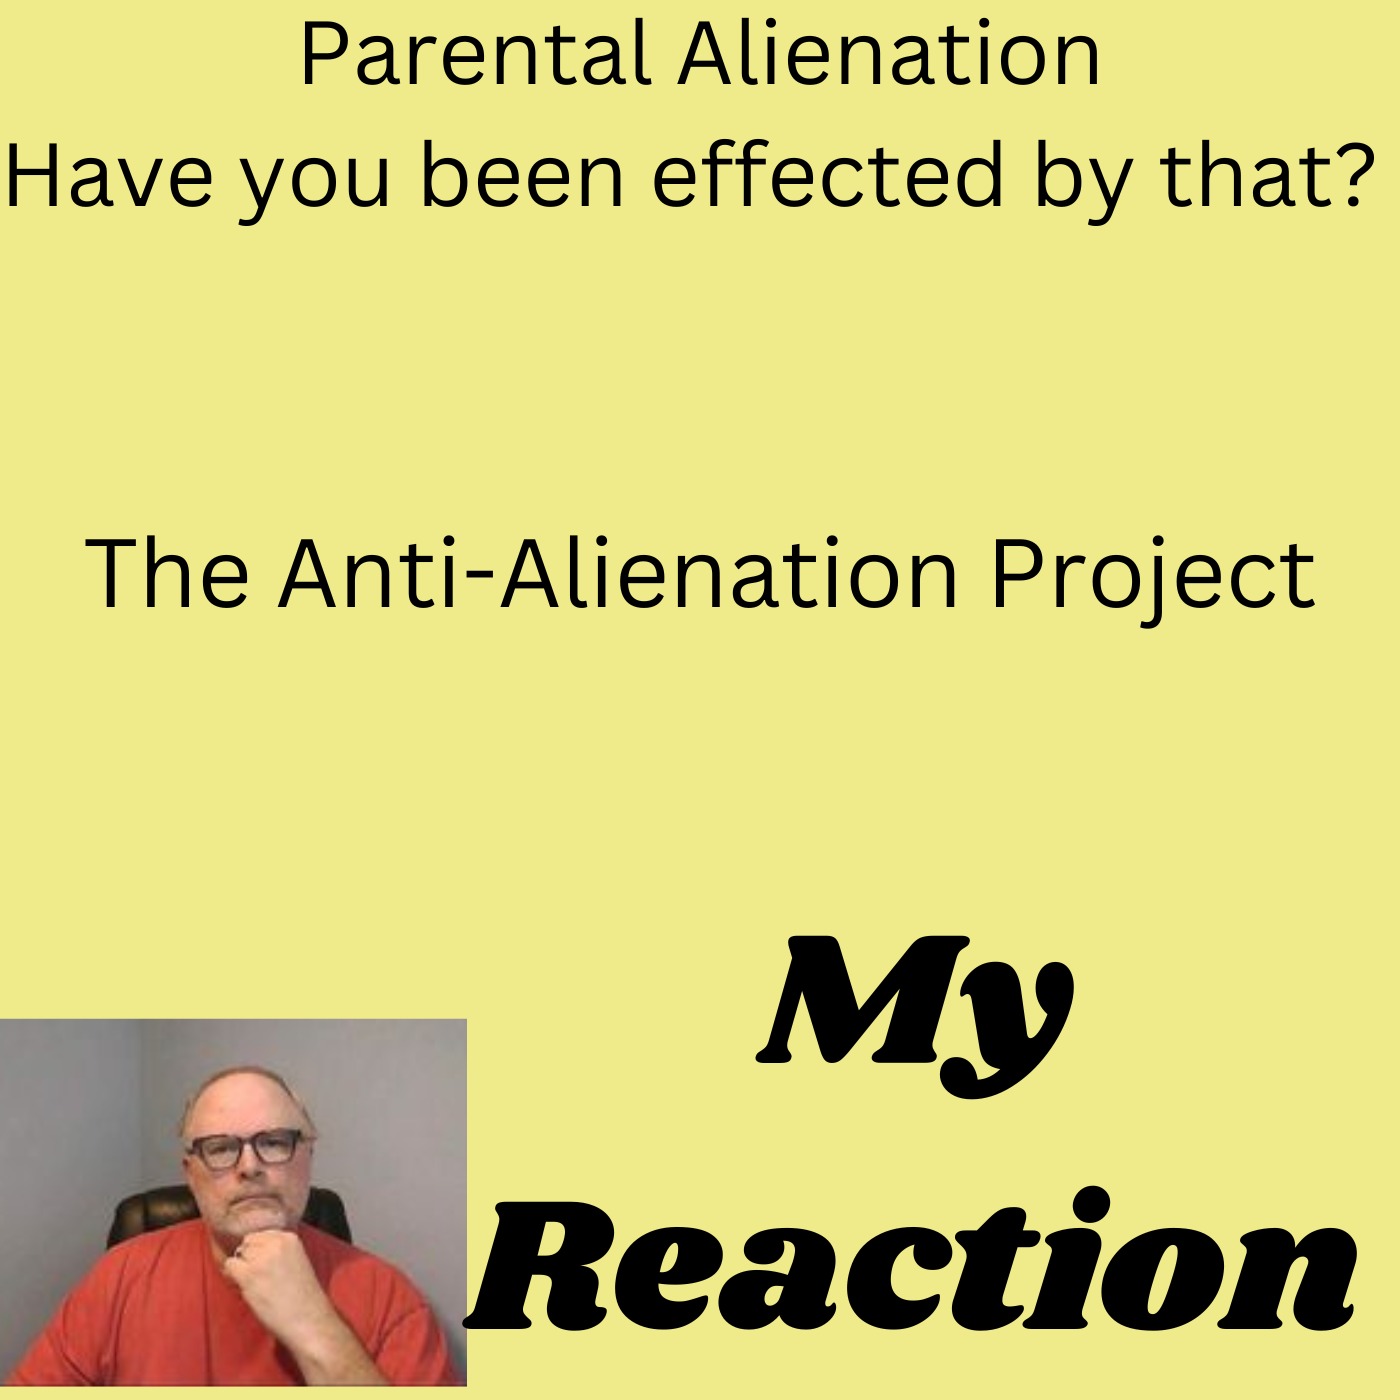 Are you effected by parental alienation?